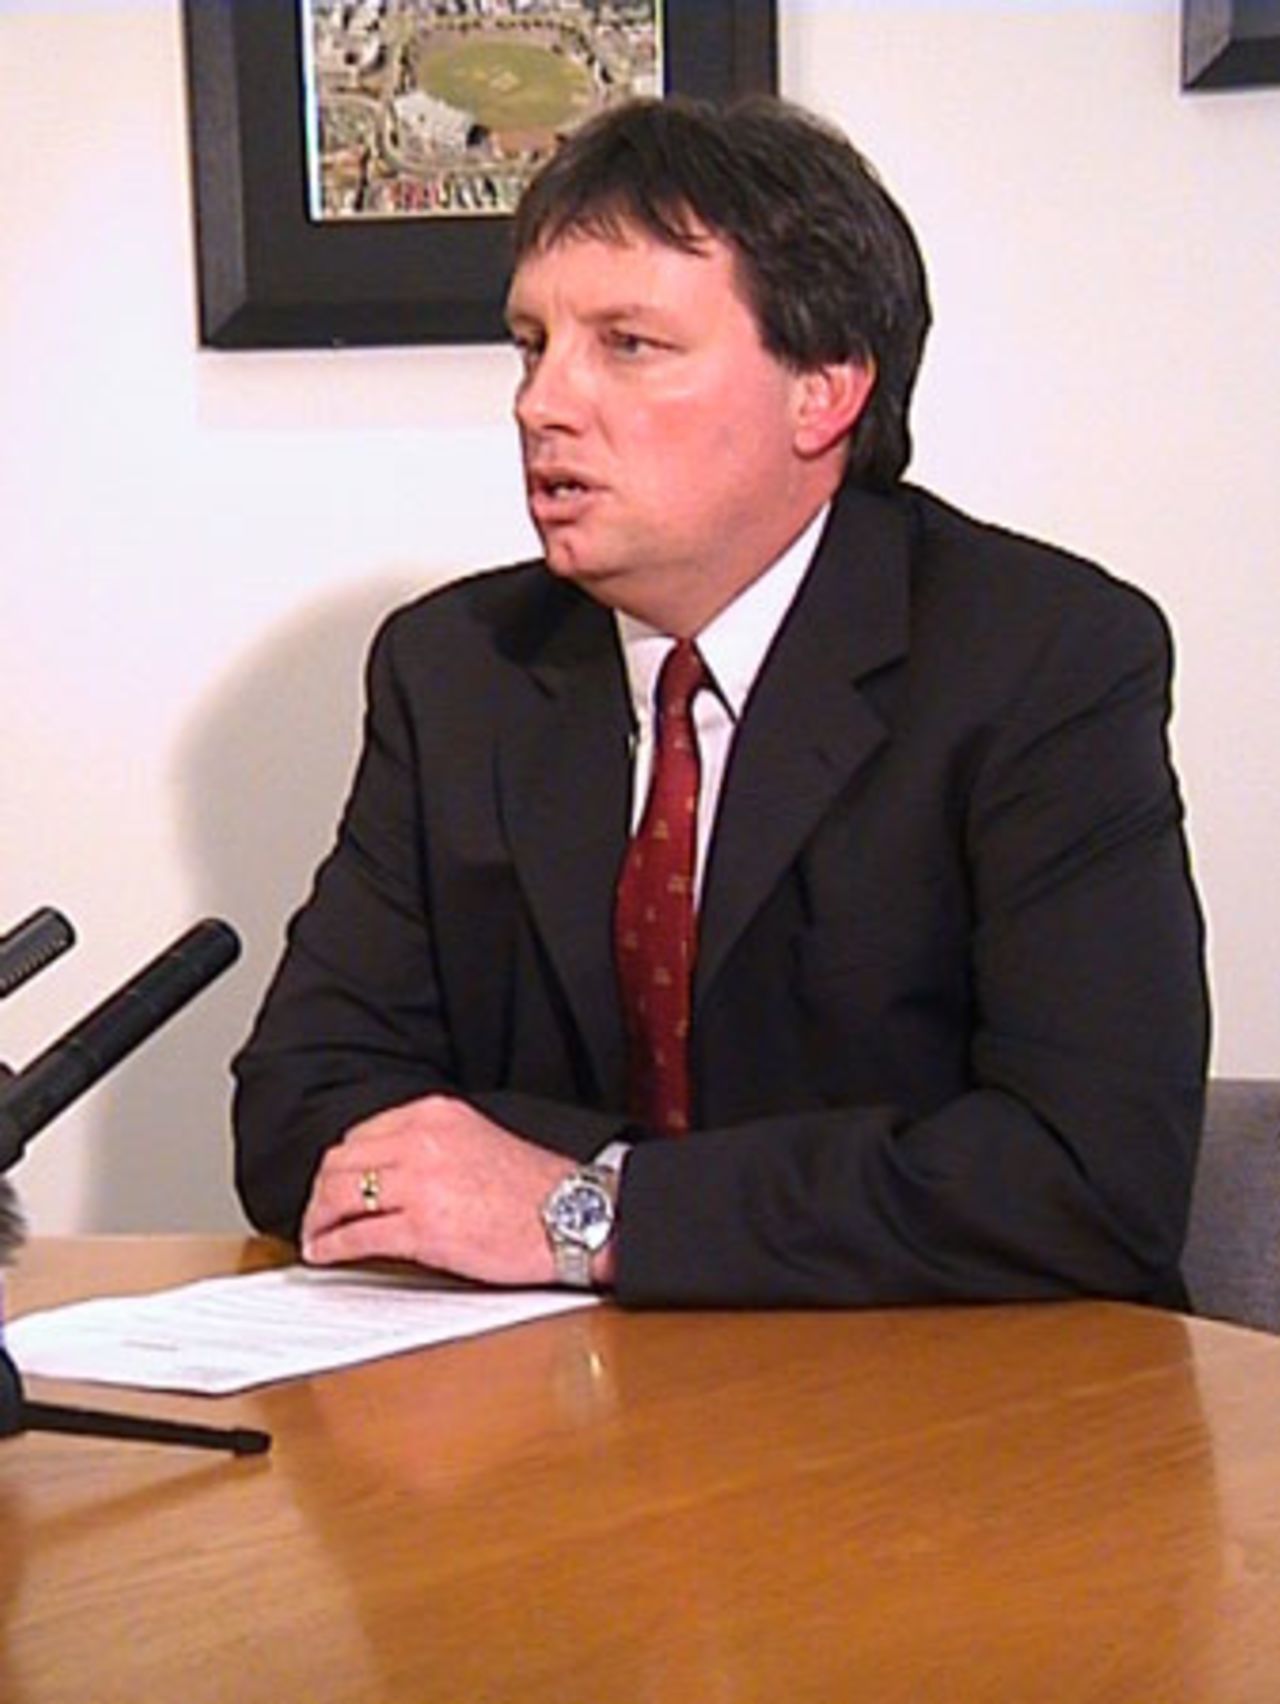 New Zealand Cricket chief executive Martin Snedden announces the return of the New Zealand team from Singapore. New Zealand were en route to Pakistan for a three One-Day International and three Test tour. He also announced the withdrawal of the New Zealand 'A' team from a one-day tournament in Hyderabad, India. 13 September 2001.